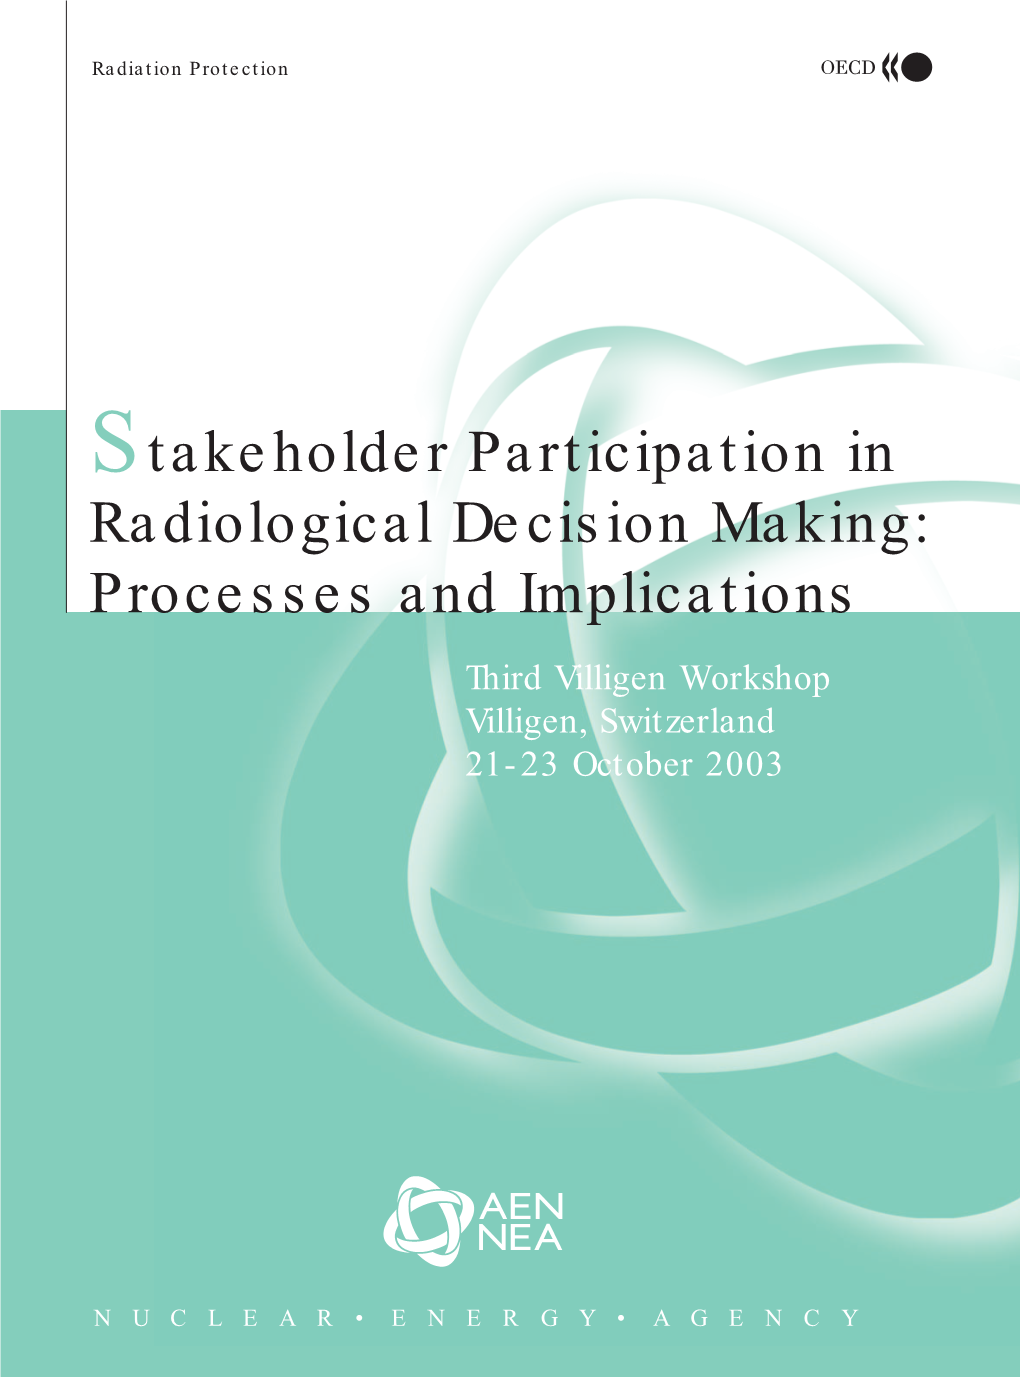 Stakeholder Participation in Radiological Decision Making